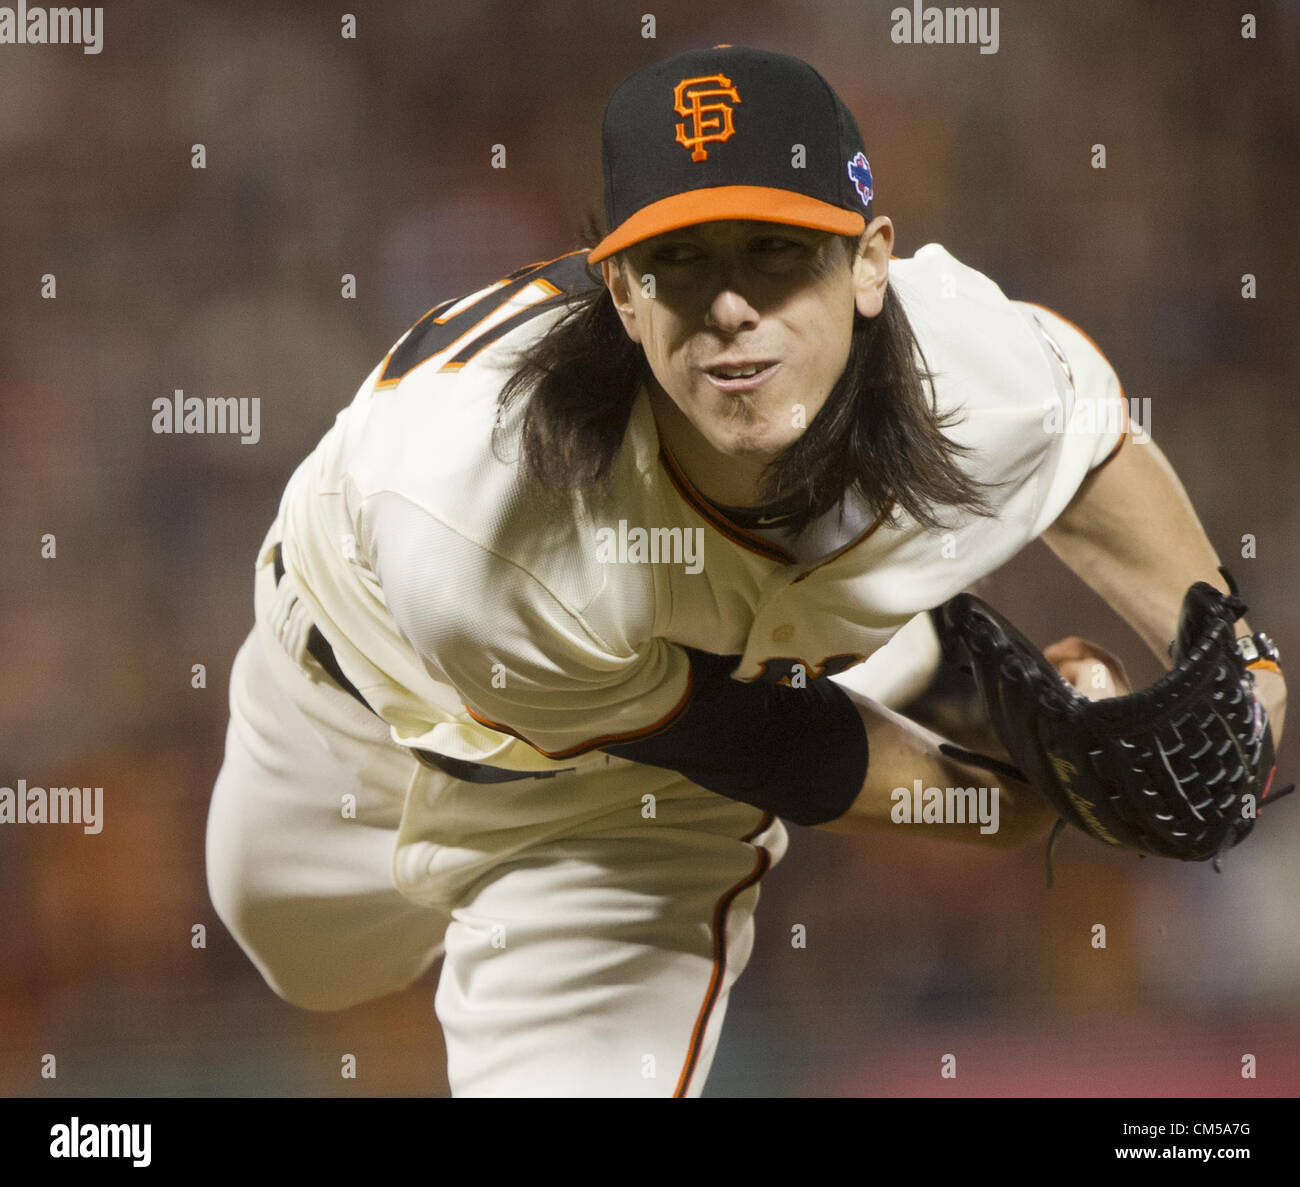 Oct. 7, 2012 - San Francisco, CA, USA - San Francisco Giants starting pitcher Tim Lincecum (55) pitches to the Cincinnati Reds in the seventh inning in Game 2 of baseball's National League Division Series at AT&T Park on Sunday October 7, 2012 in San Francisco, Calif. (Credit Image: © Paul Kitagaki Jr/Sacramento Bee/ZUMAPRESS.com) Stock Photo